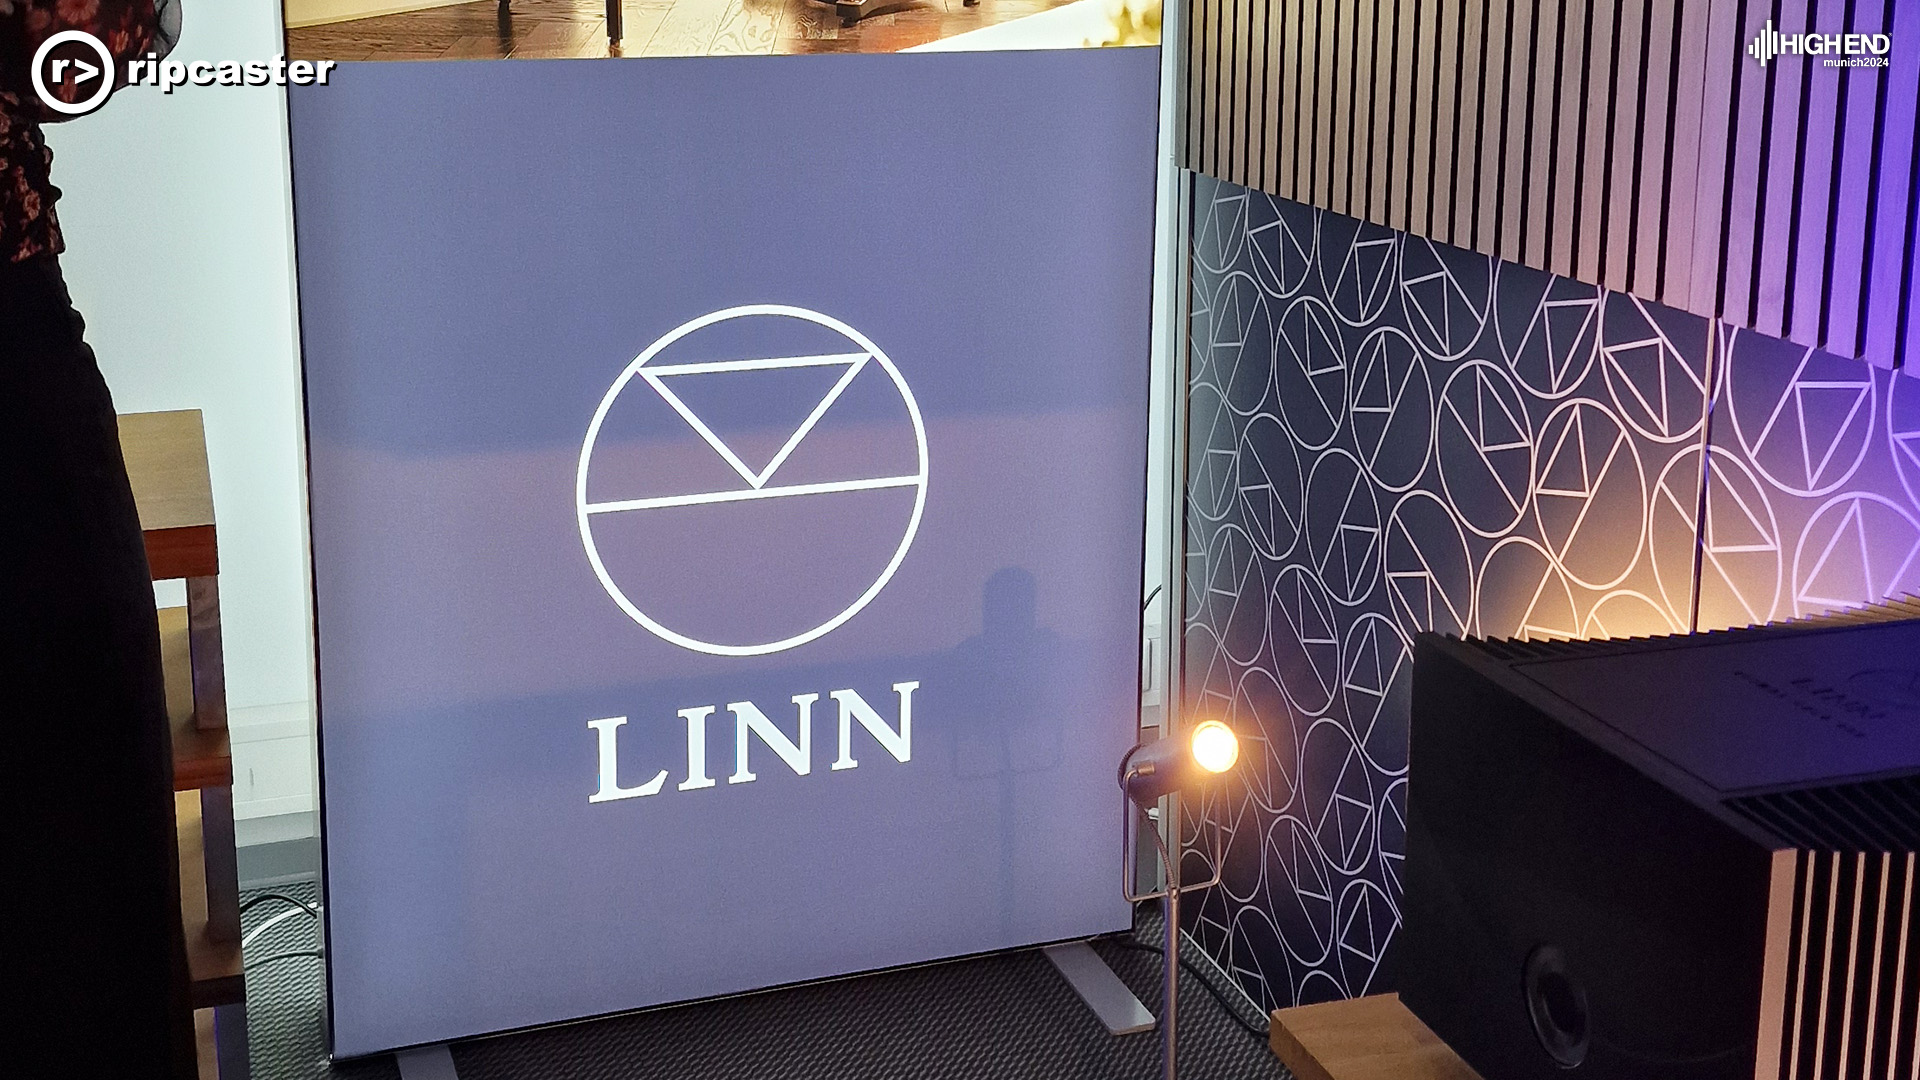 The Linn logo on a purple background with lot of Linn logos on a sign beside it